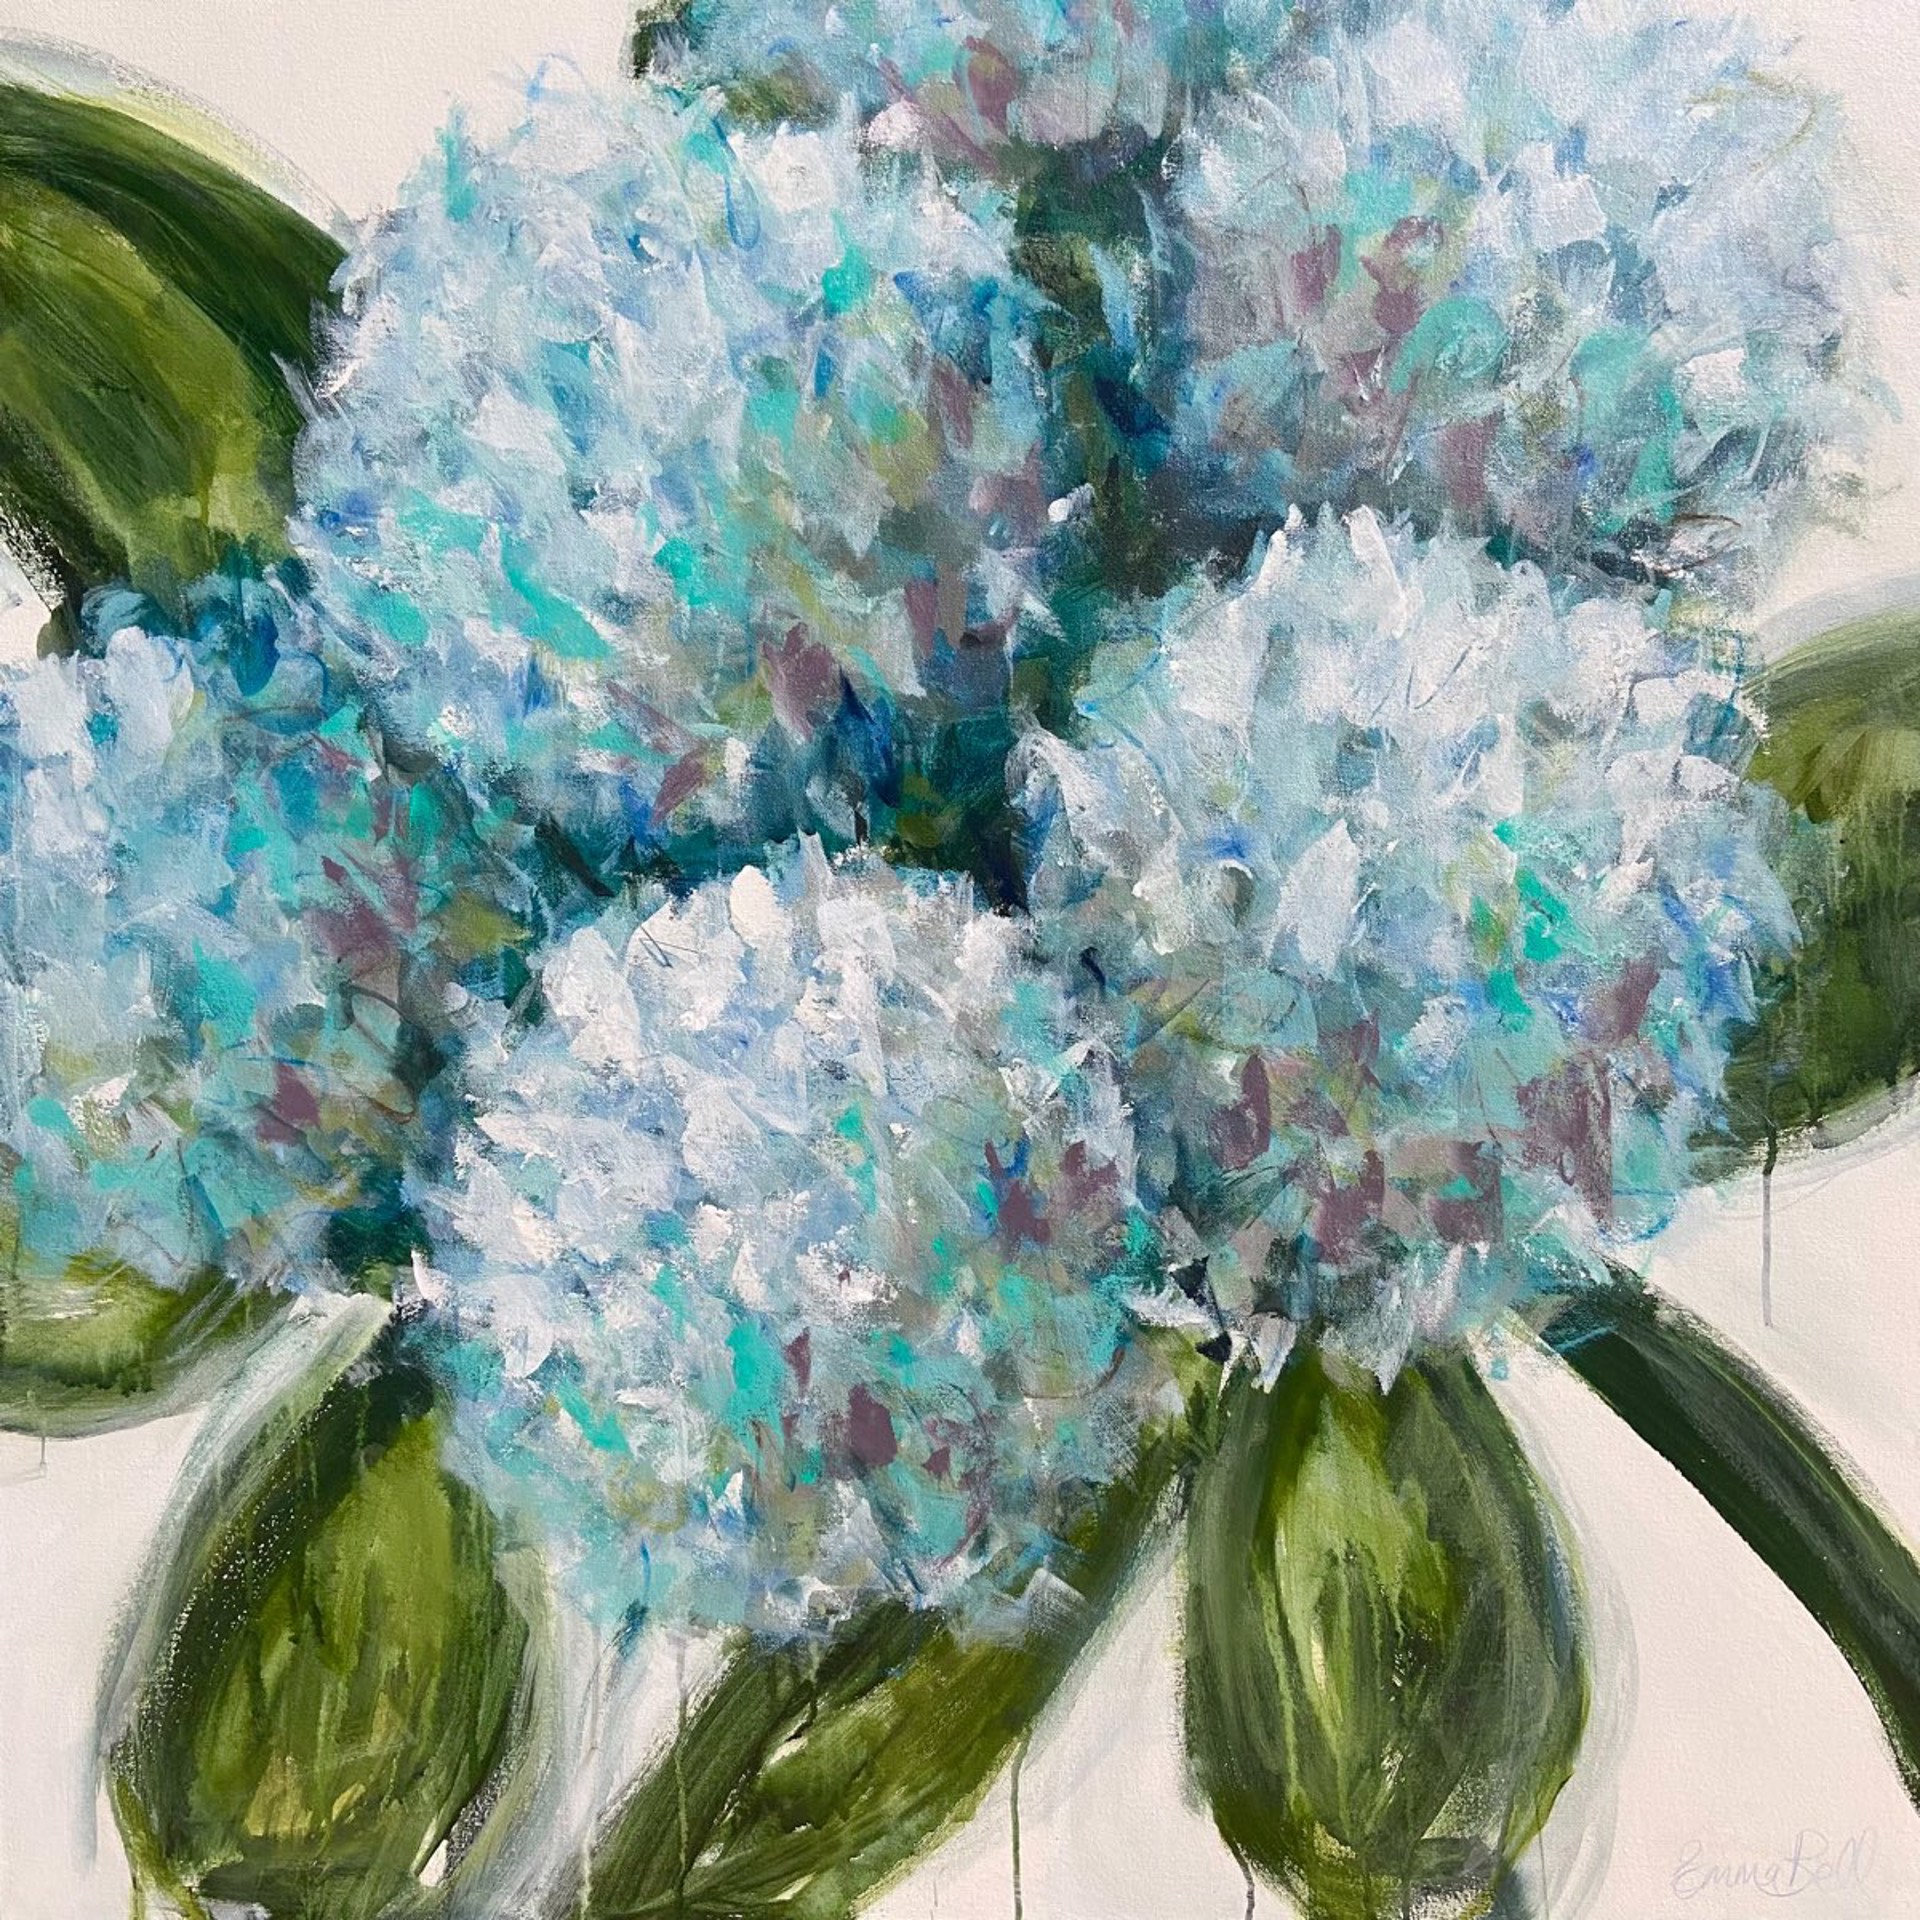 Hydrangeas for the Queen by Emma Bell